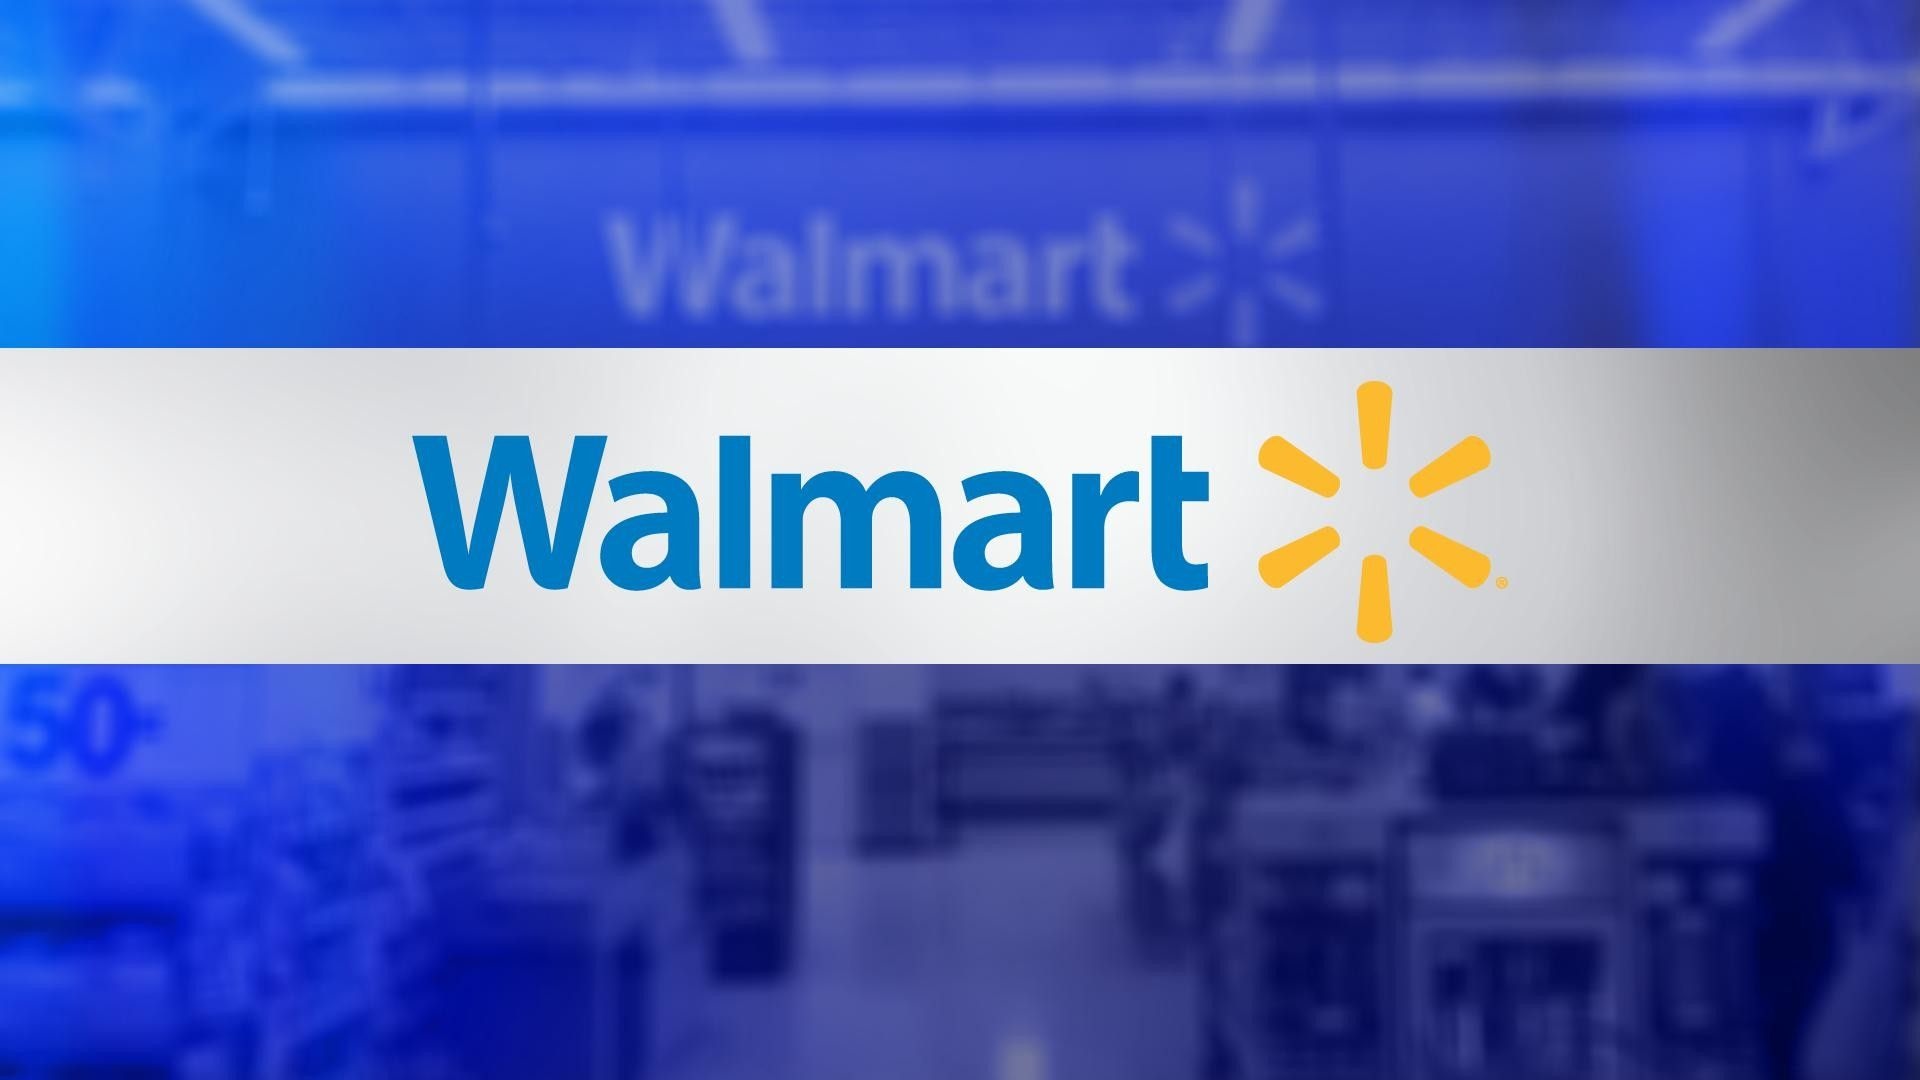 Walmart: Wal-Mart Stores Inc, A multinational retail corporation, Several chains of discount departments and warehouse stores. 1920x1080 Full HD Background.